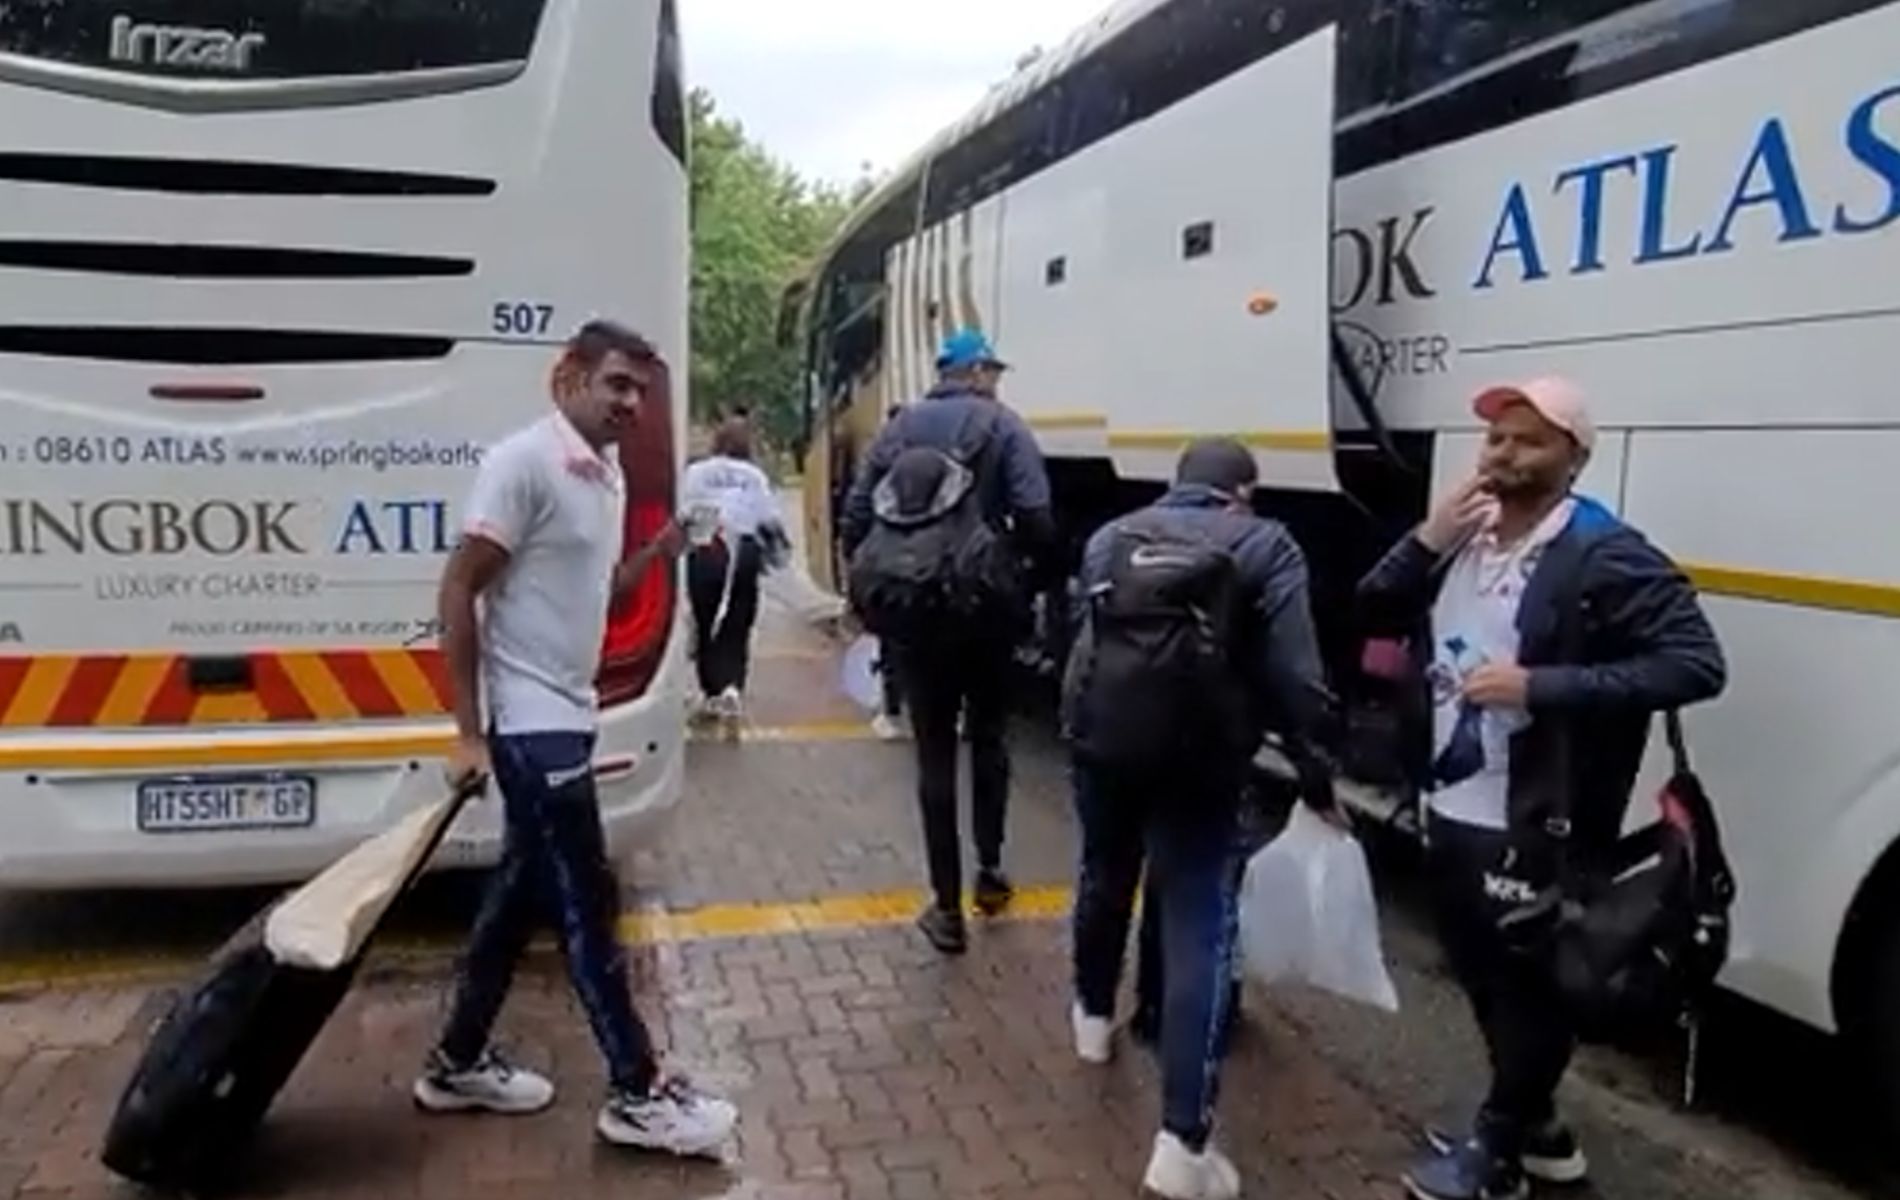 India landed in Cape Town today ahead of the third Test against South Africa.